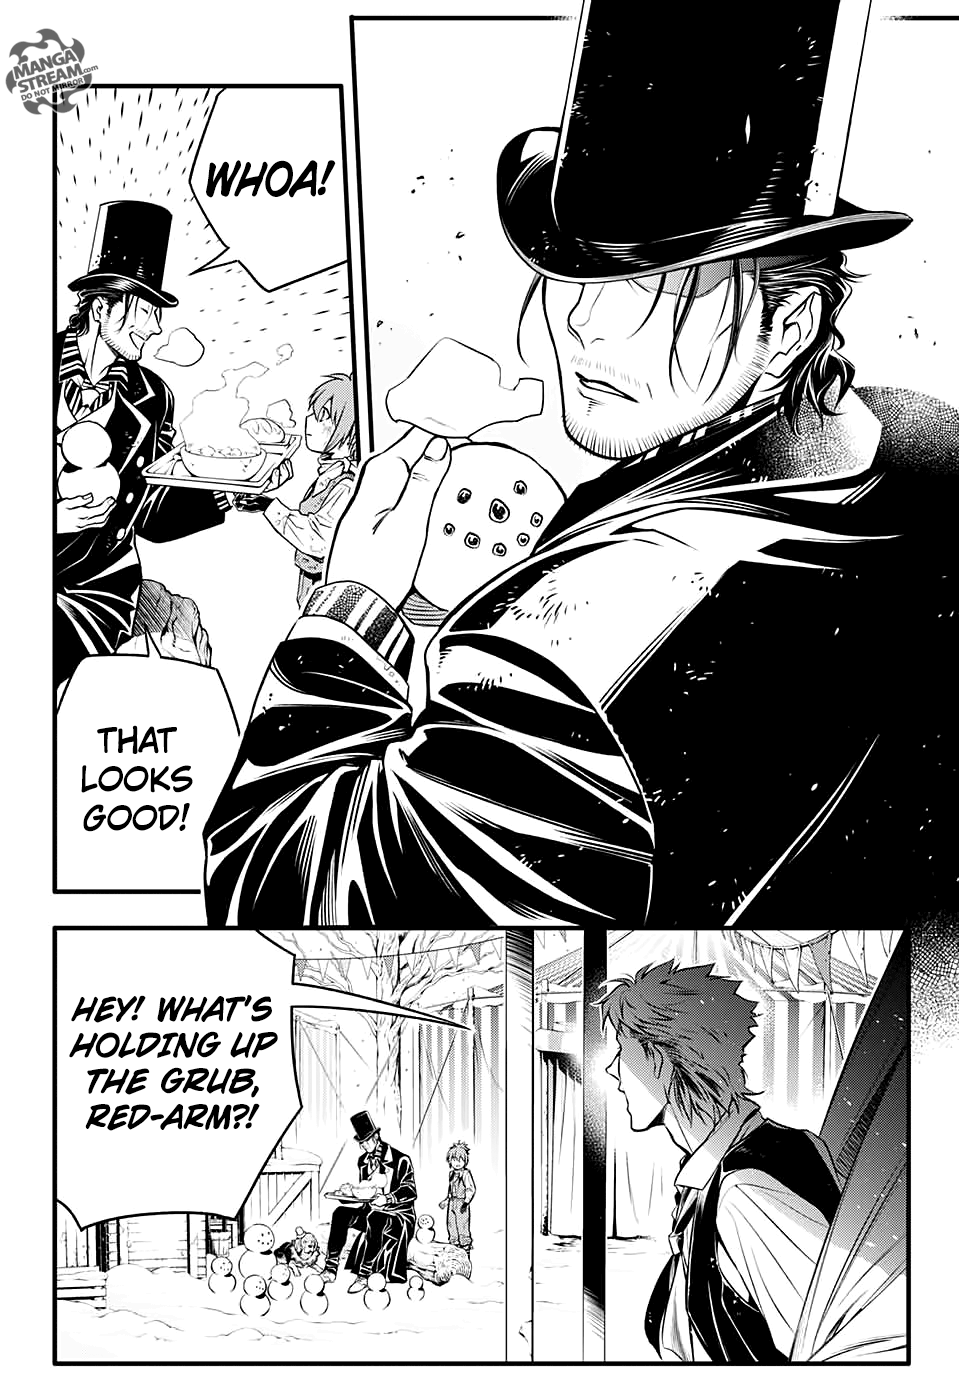 D.Gray-man chapter 232 page 8